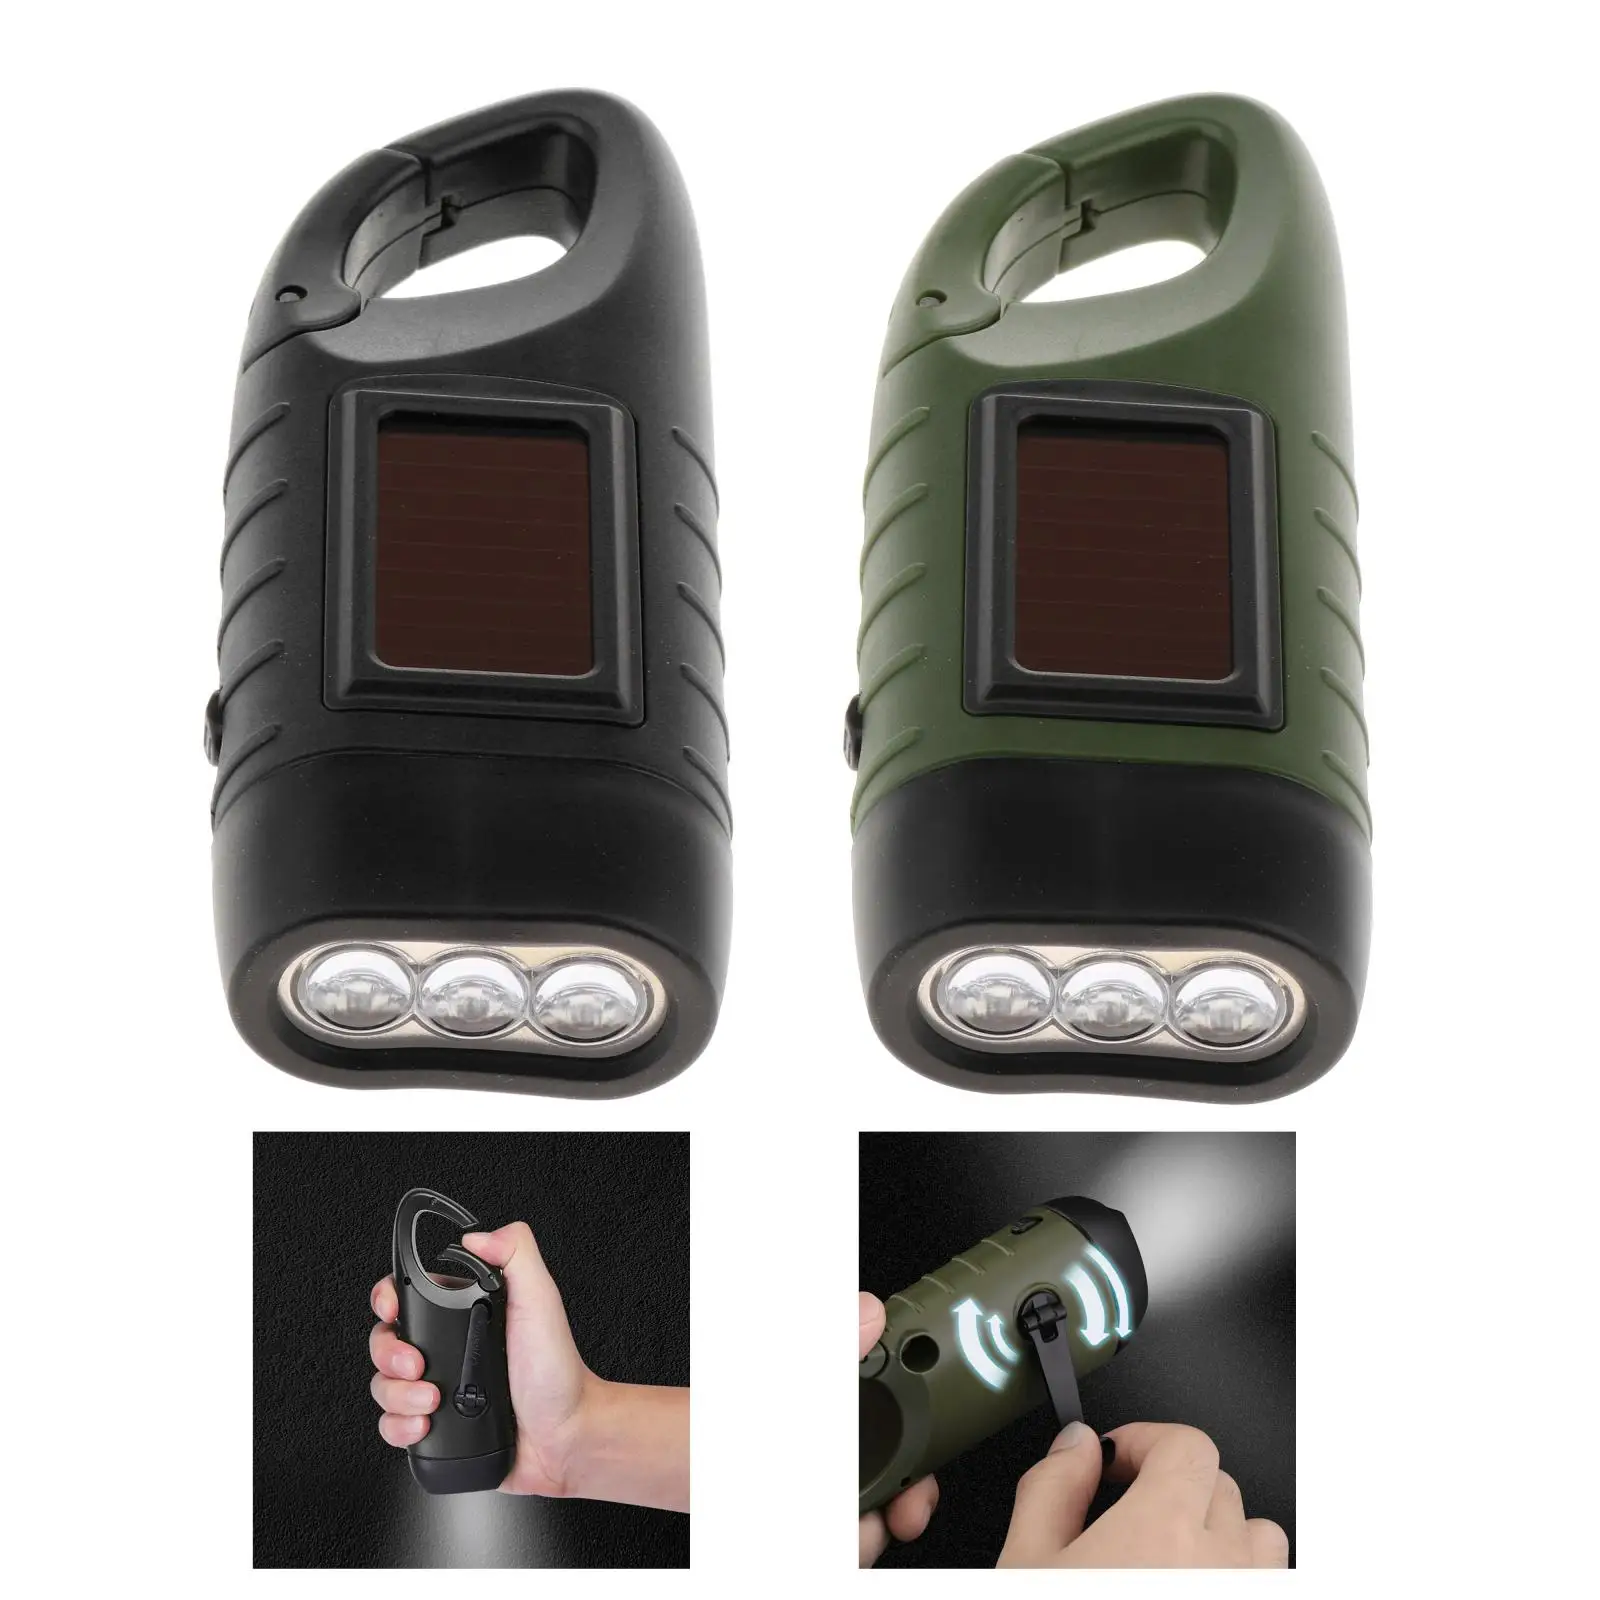 Handheld LED Torch Super Bright Hand Cranking Flashlight USB Rechargeable Work Light for Camping Hiking Backpack Outdoor Sports